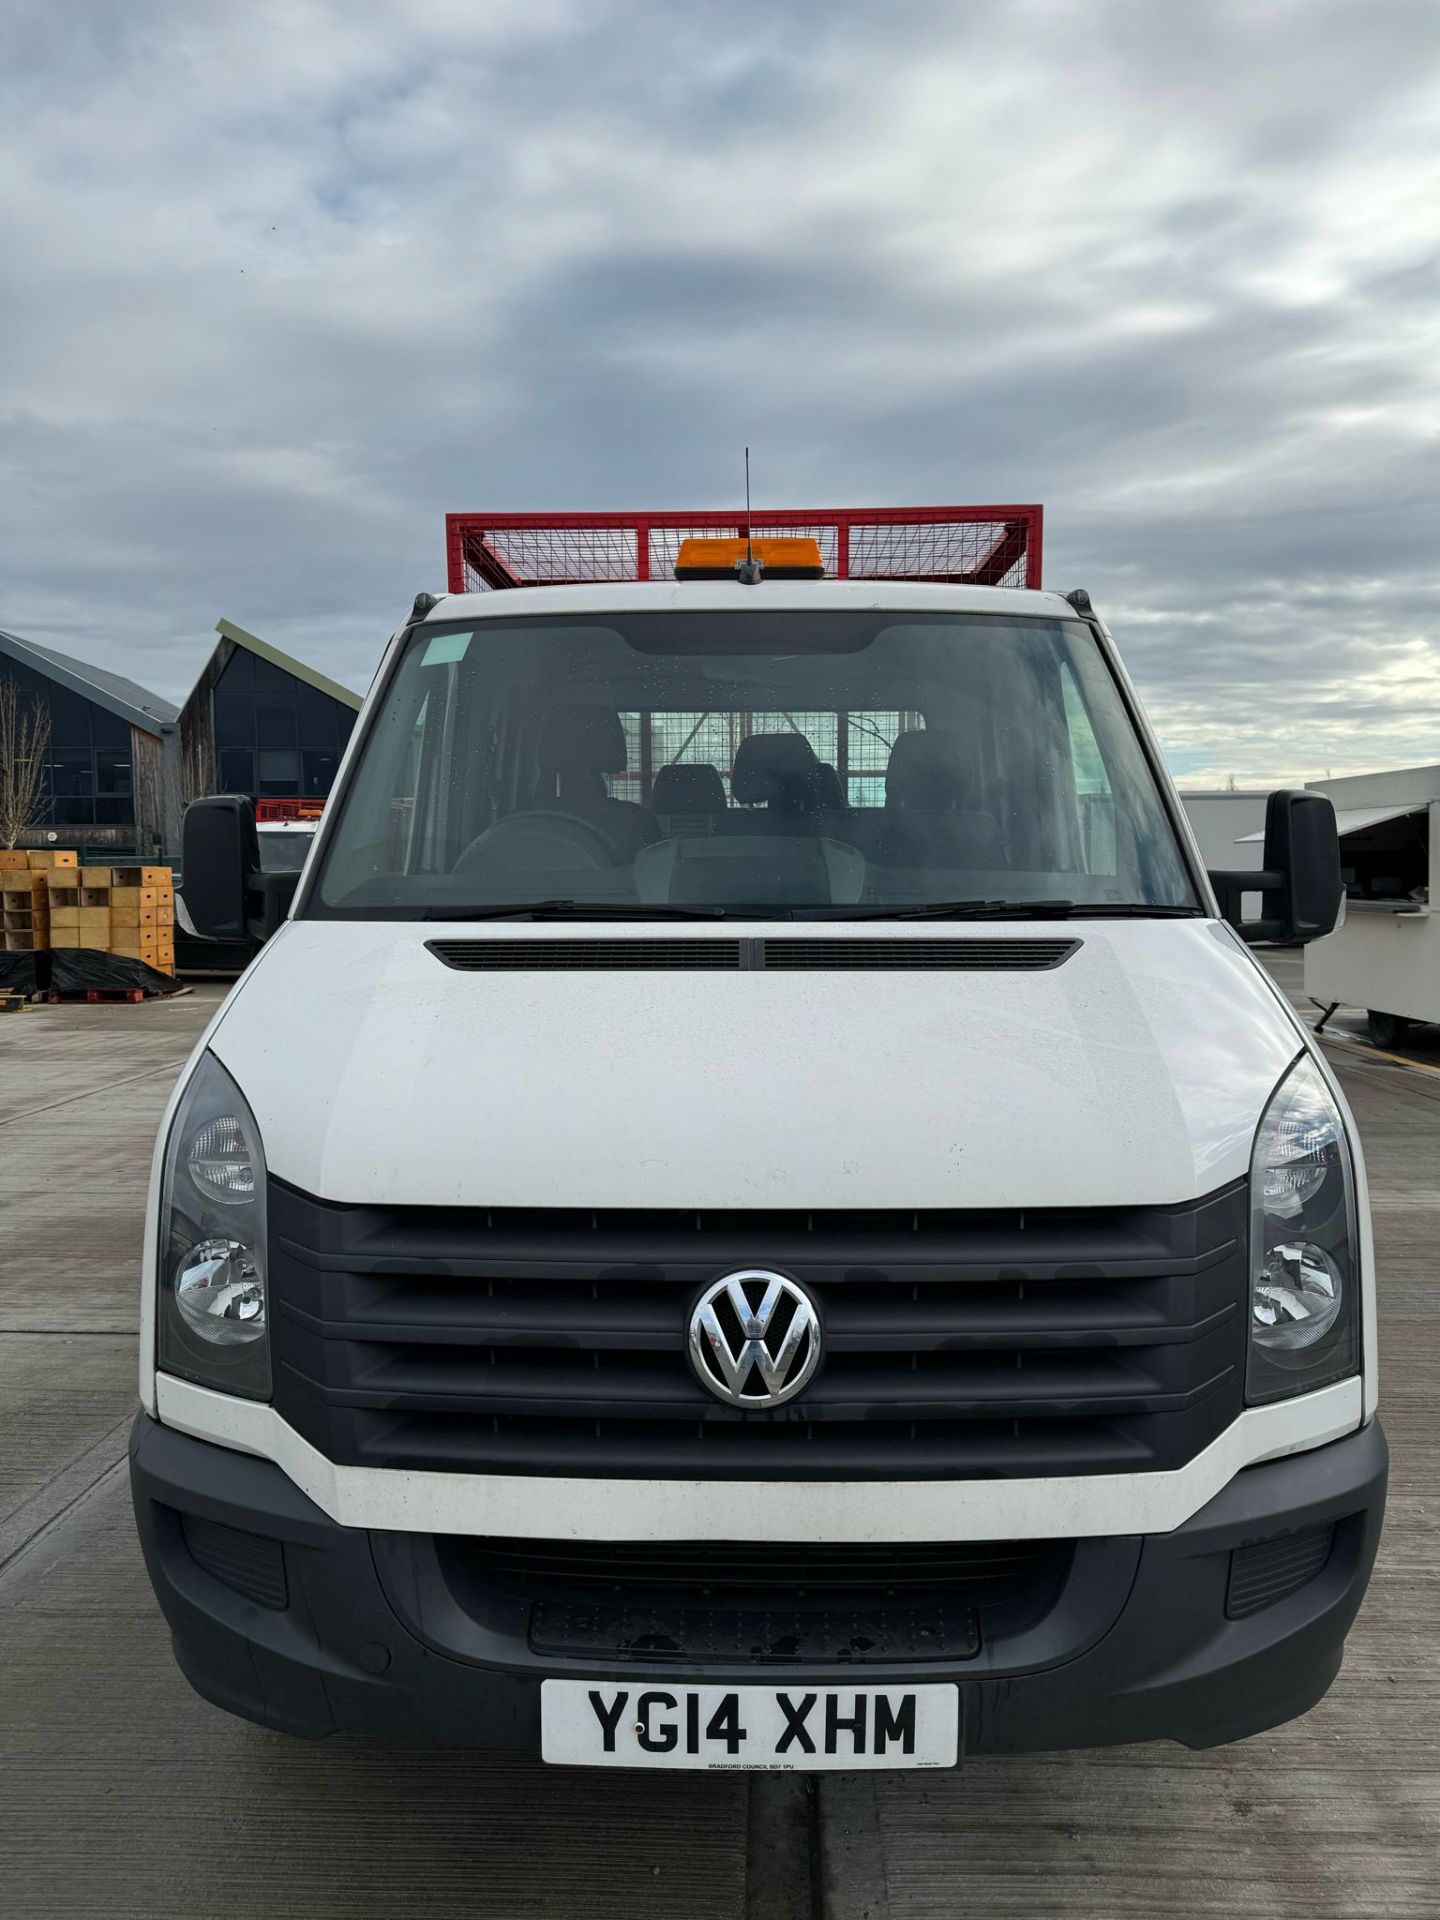 2013 - Volkswagen Crafter, Caged Tipper (Ex-Council Owned & Maintained) - Image 3 of 25